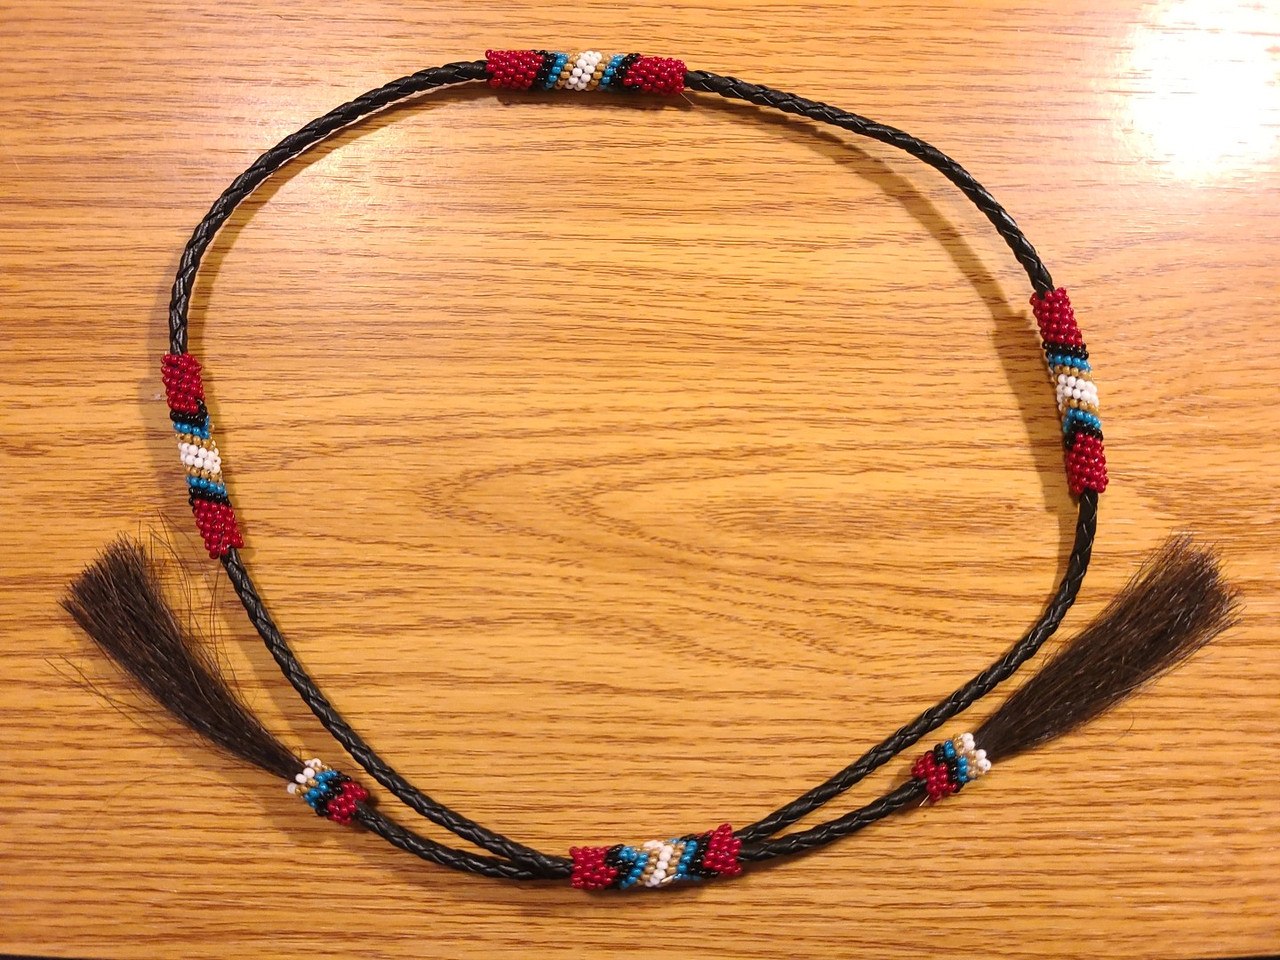 Navajo Style Beaded Hatband, Buffalo Wide Hat Band, Hat Accessories